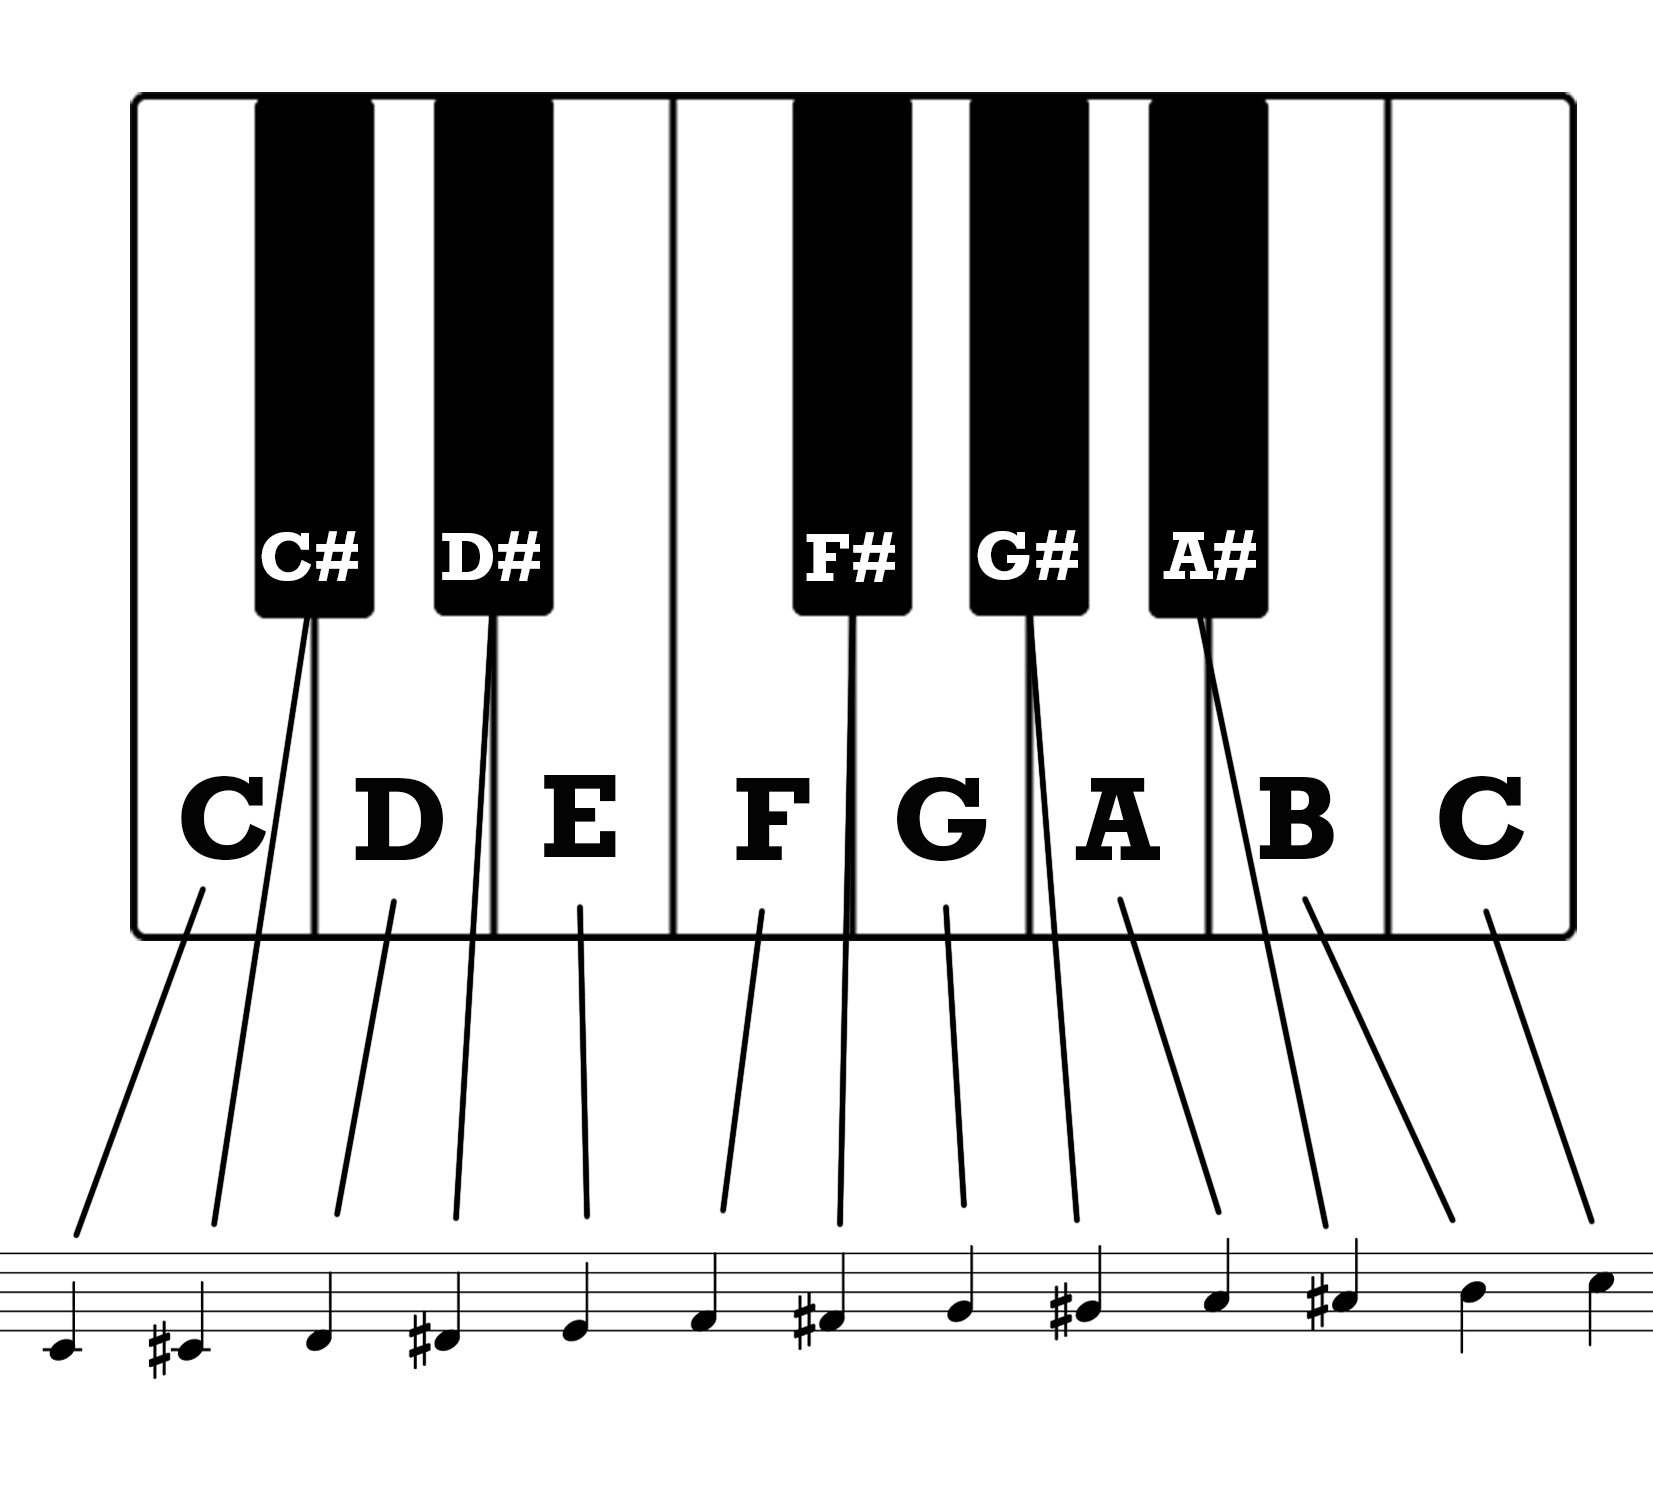 Chromatic scale with keyboard sharps